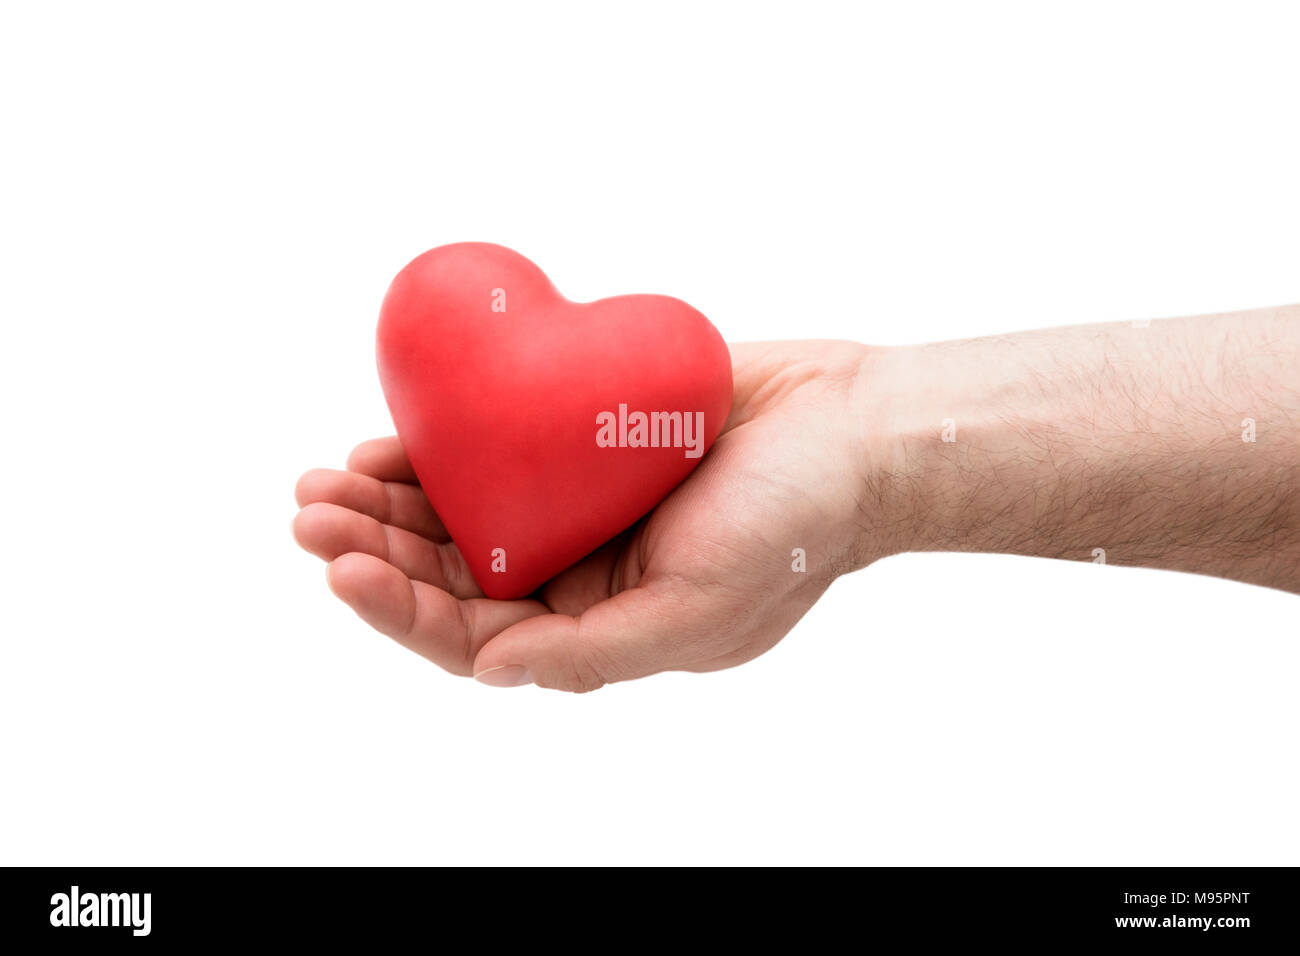 Red heart in man's hand Stock Photo